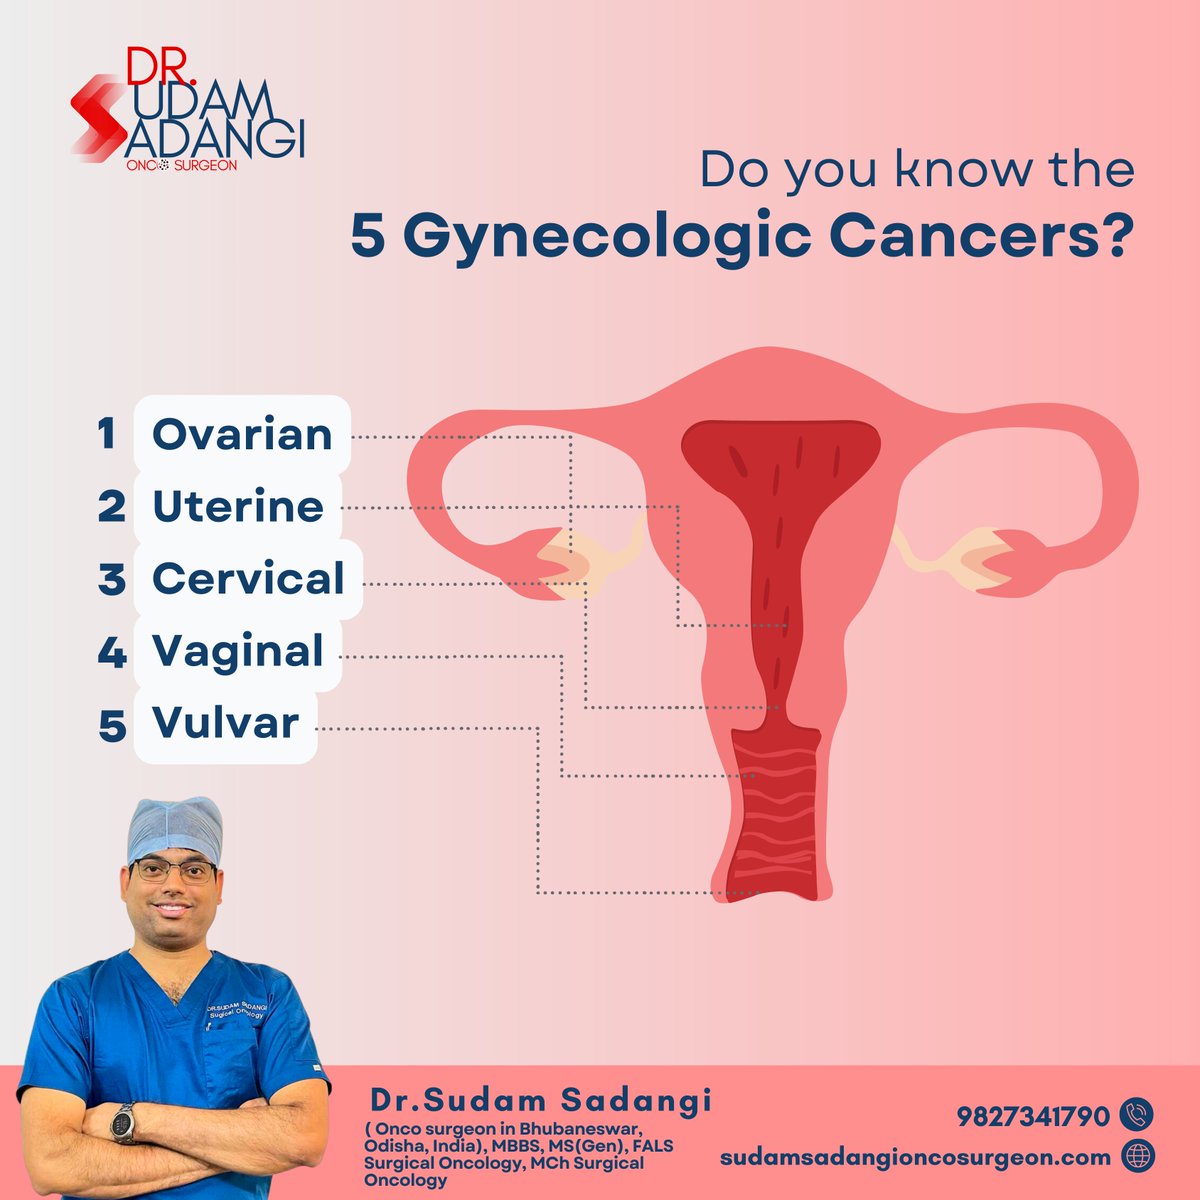 5 Gynecologic Cancers that are most commonly seen in Women. 
Ovarian
Uterine cancer
Cervical
Vaginal cancer
Vulvar cancer
#Gynecologiccancer #Ovariancancer #uterinecancer #cervicalcancer #vaginalcancer #vulvarcancer #DrSudamsadangi #Oncosurgeon #cancersurgeon #Odisha